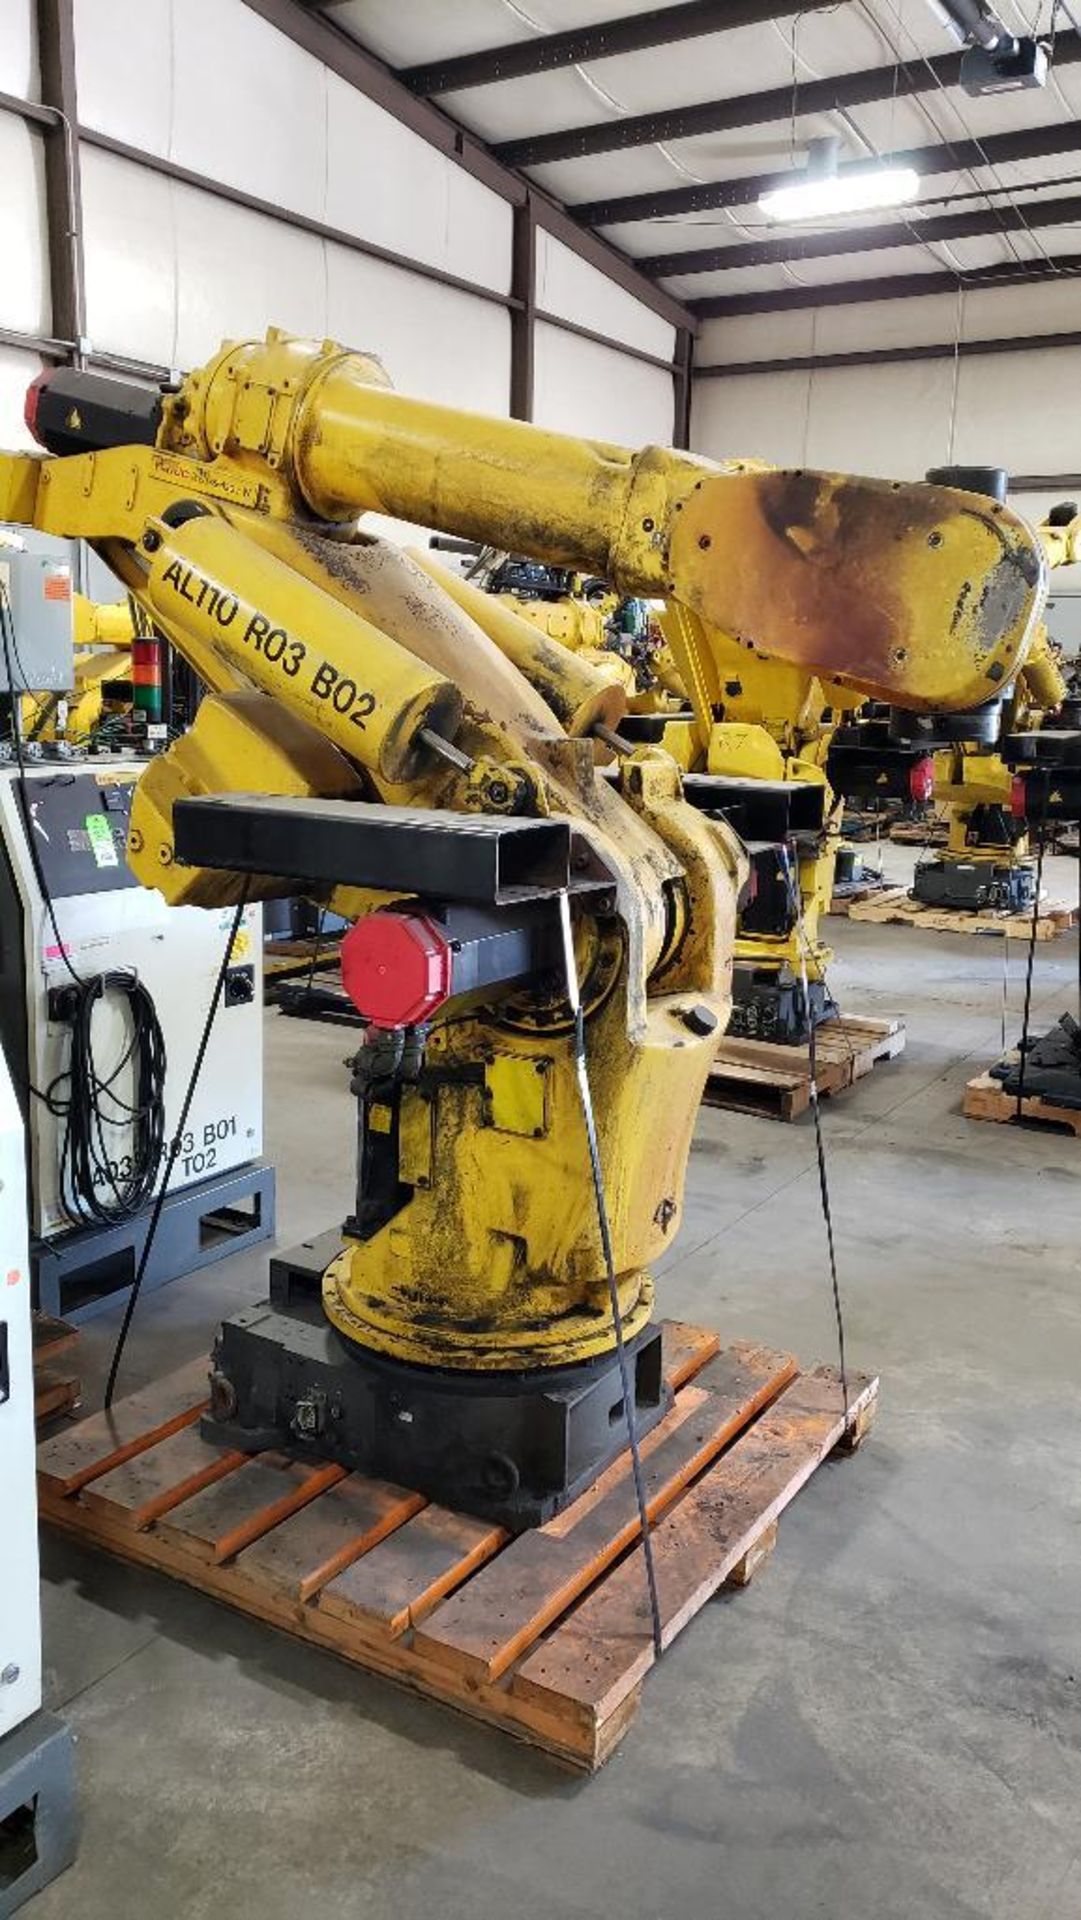 Fanuc S-420iW robot with R-J2 controller. - Image 3 of 15